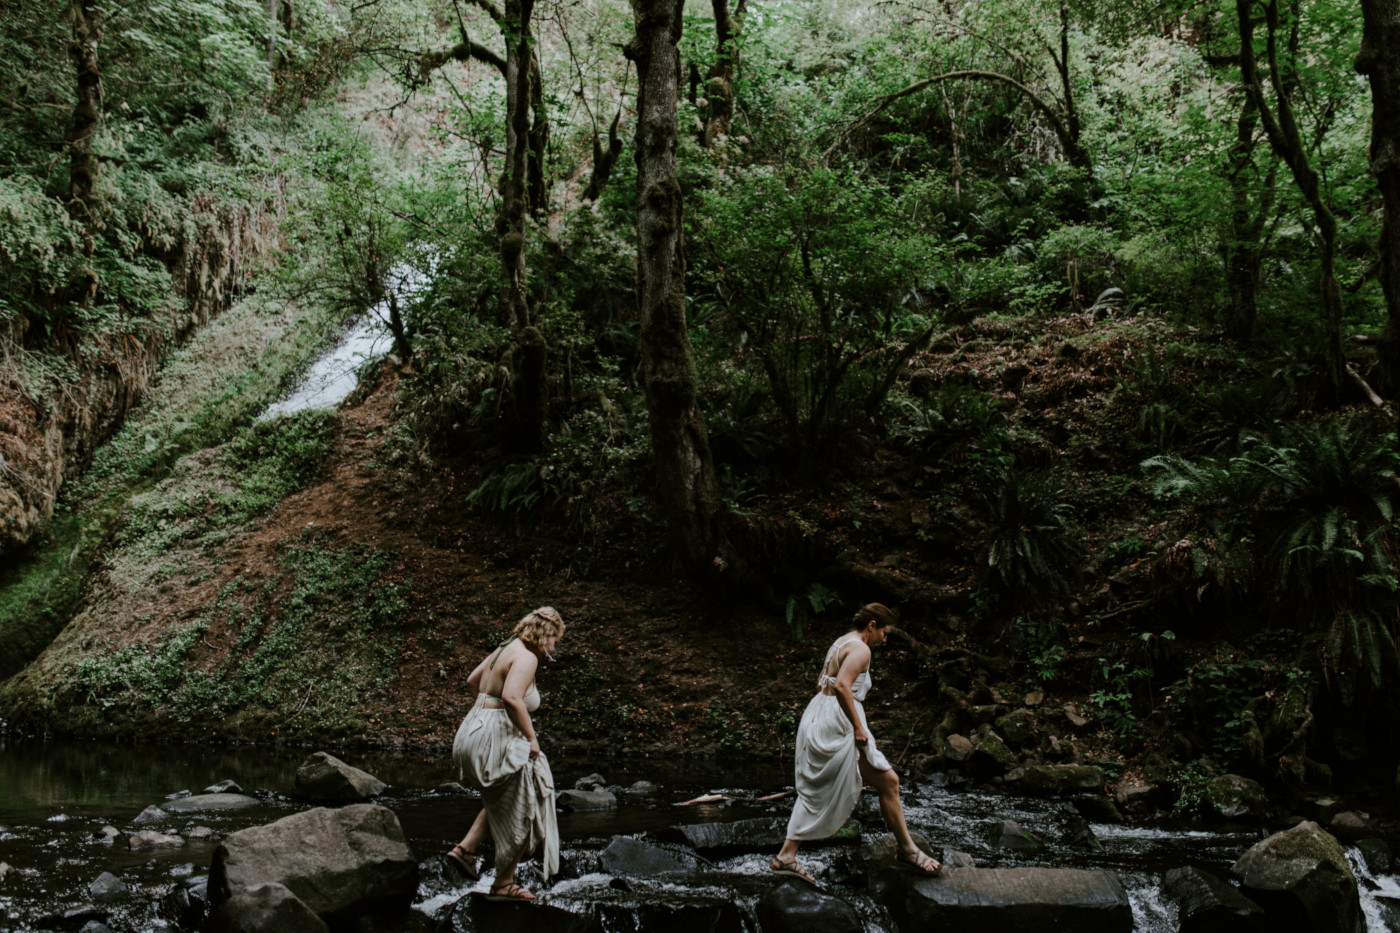 Kate and Audrey crossing a river. Elopement wedding photography at Bridal Veil Falls by Sienna Plus Josh.